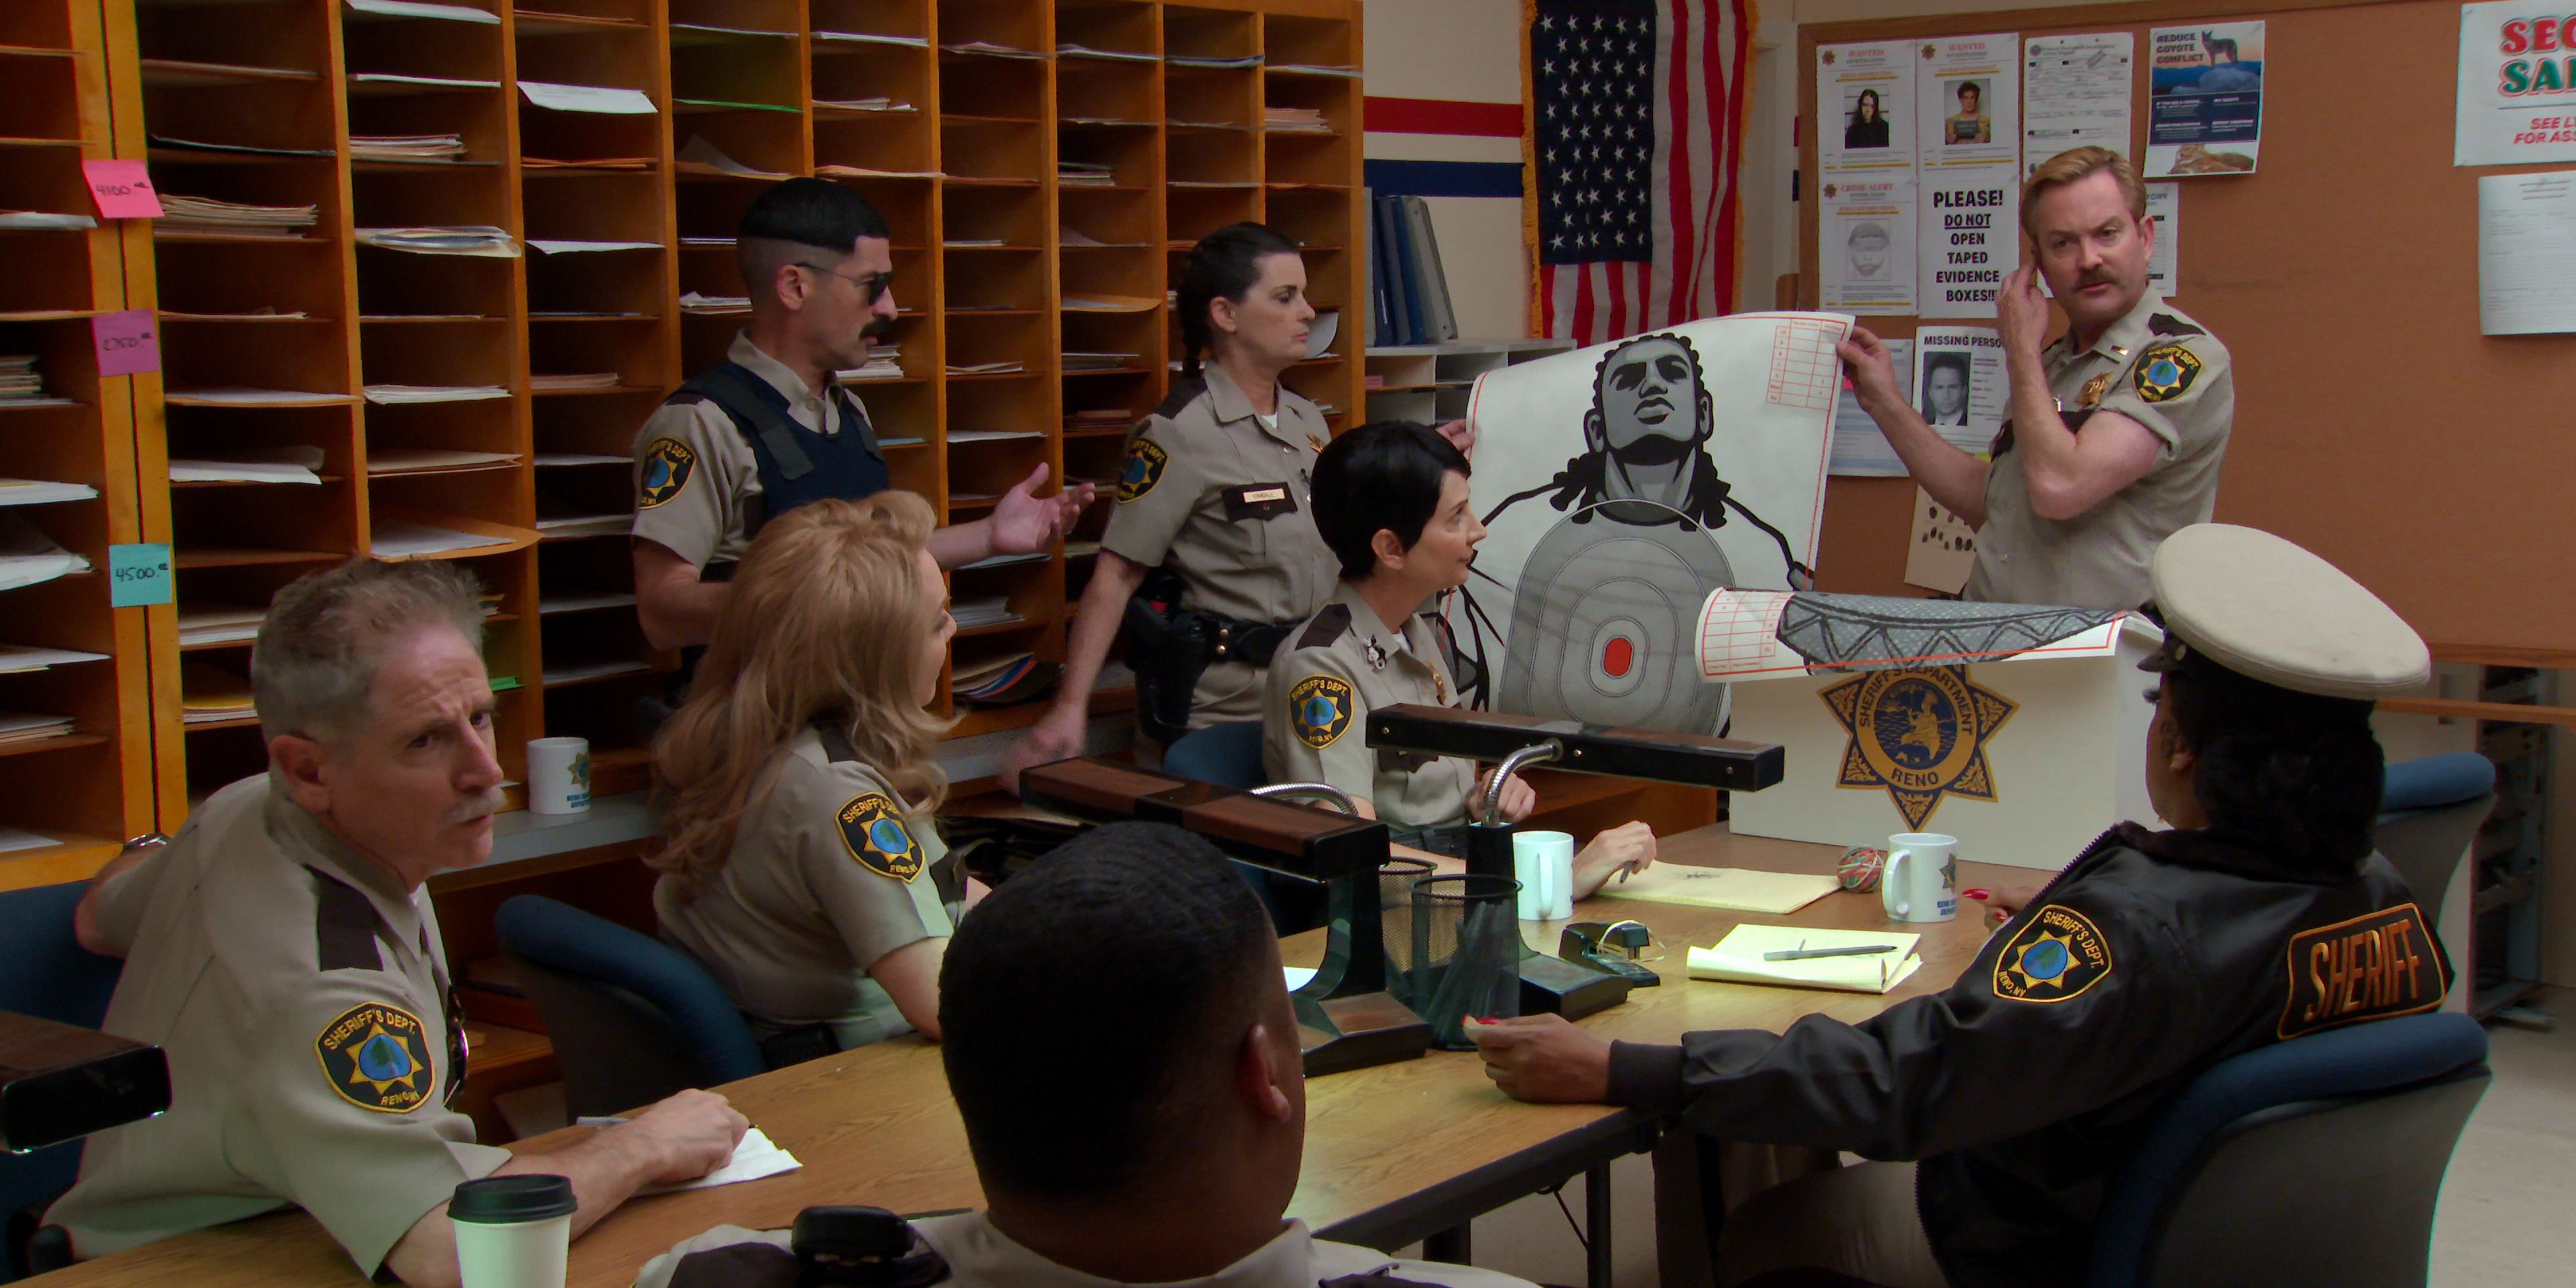 The Reno 911 characters have a meeting